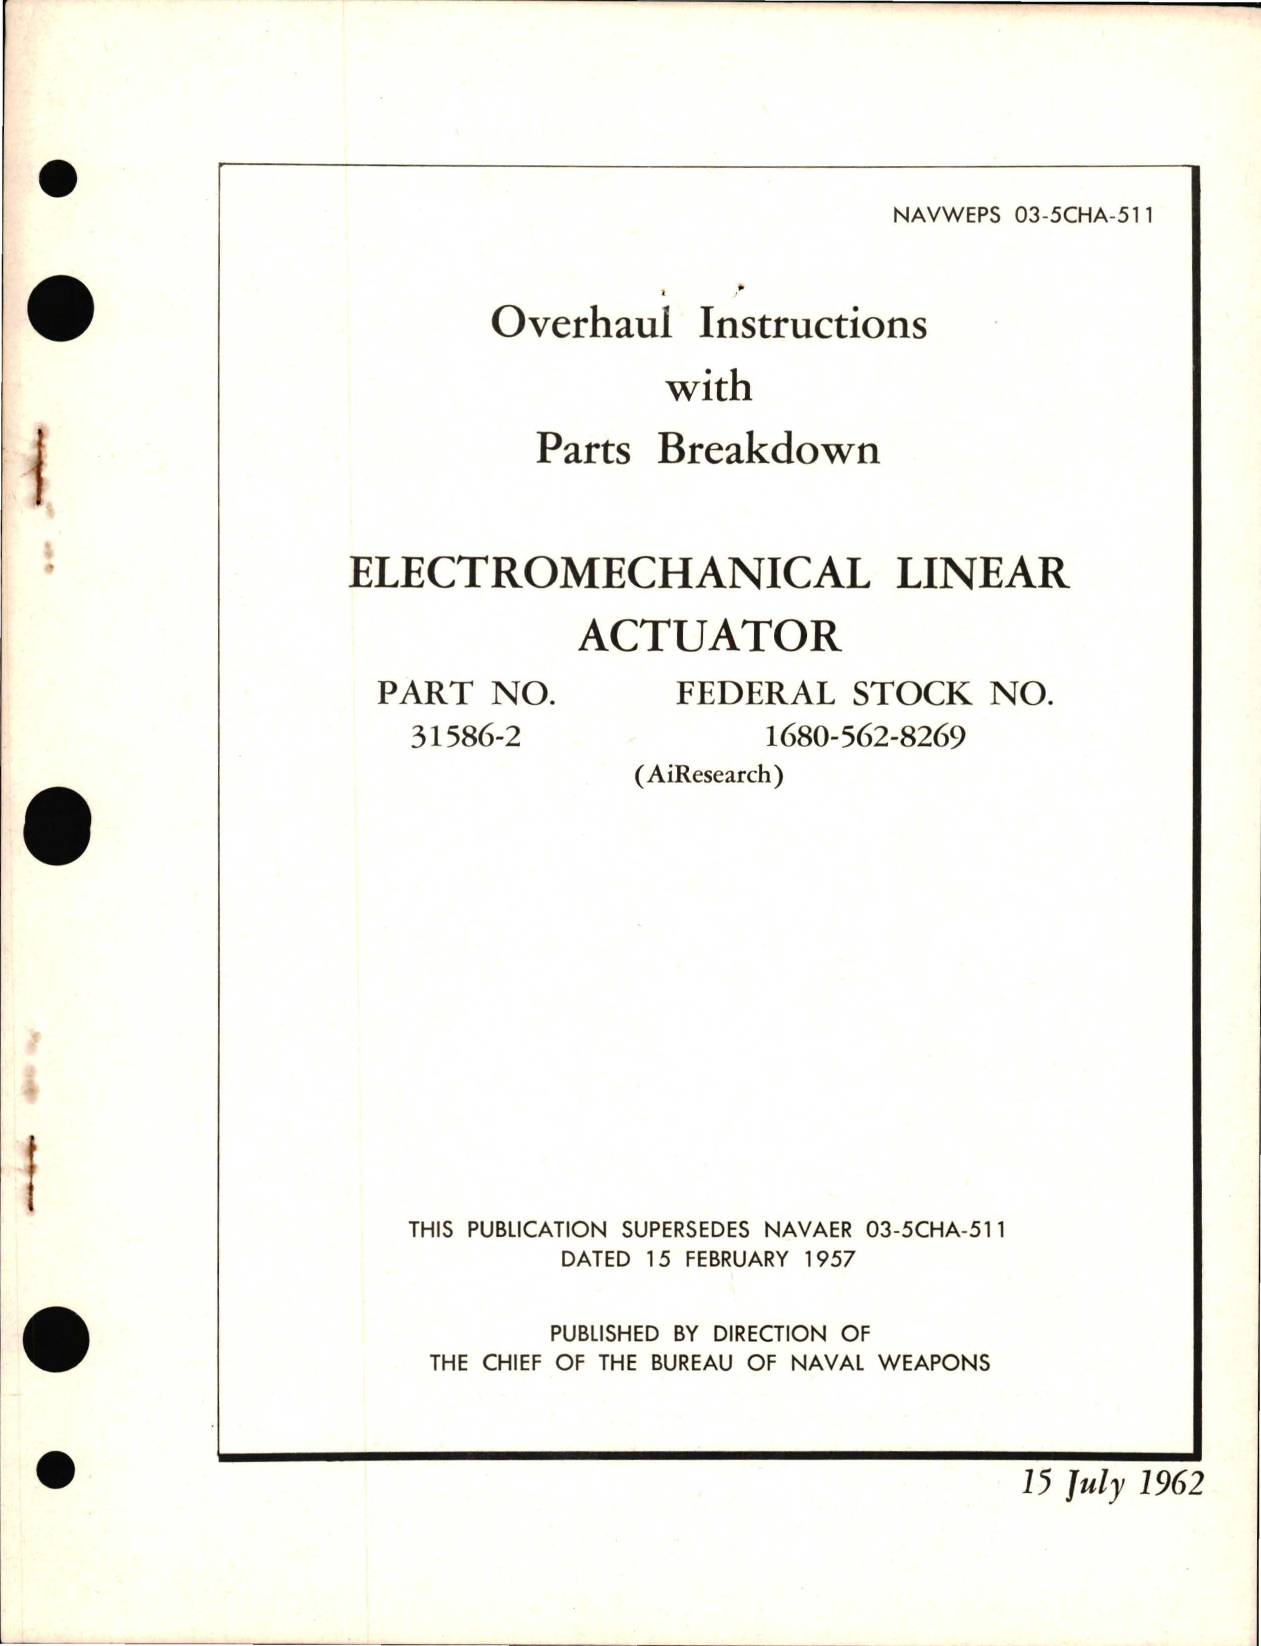 Sample page 5 from AirCorps Library document: Overhaul Instructions with Parts Breakdown for Electromechanical Linear Actuator - Part 31586-2 